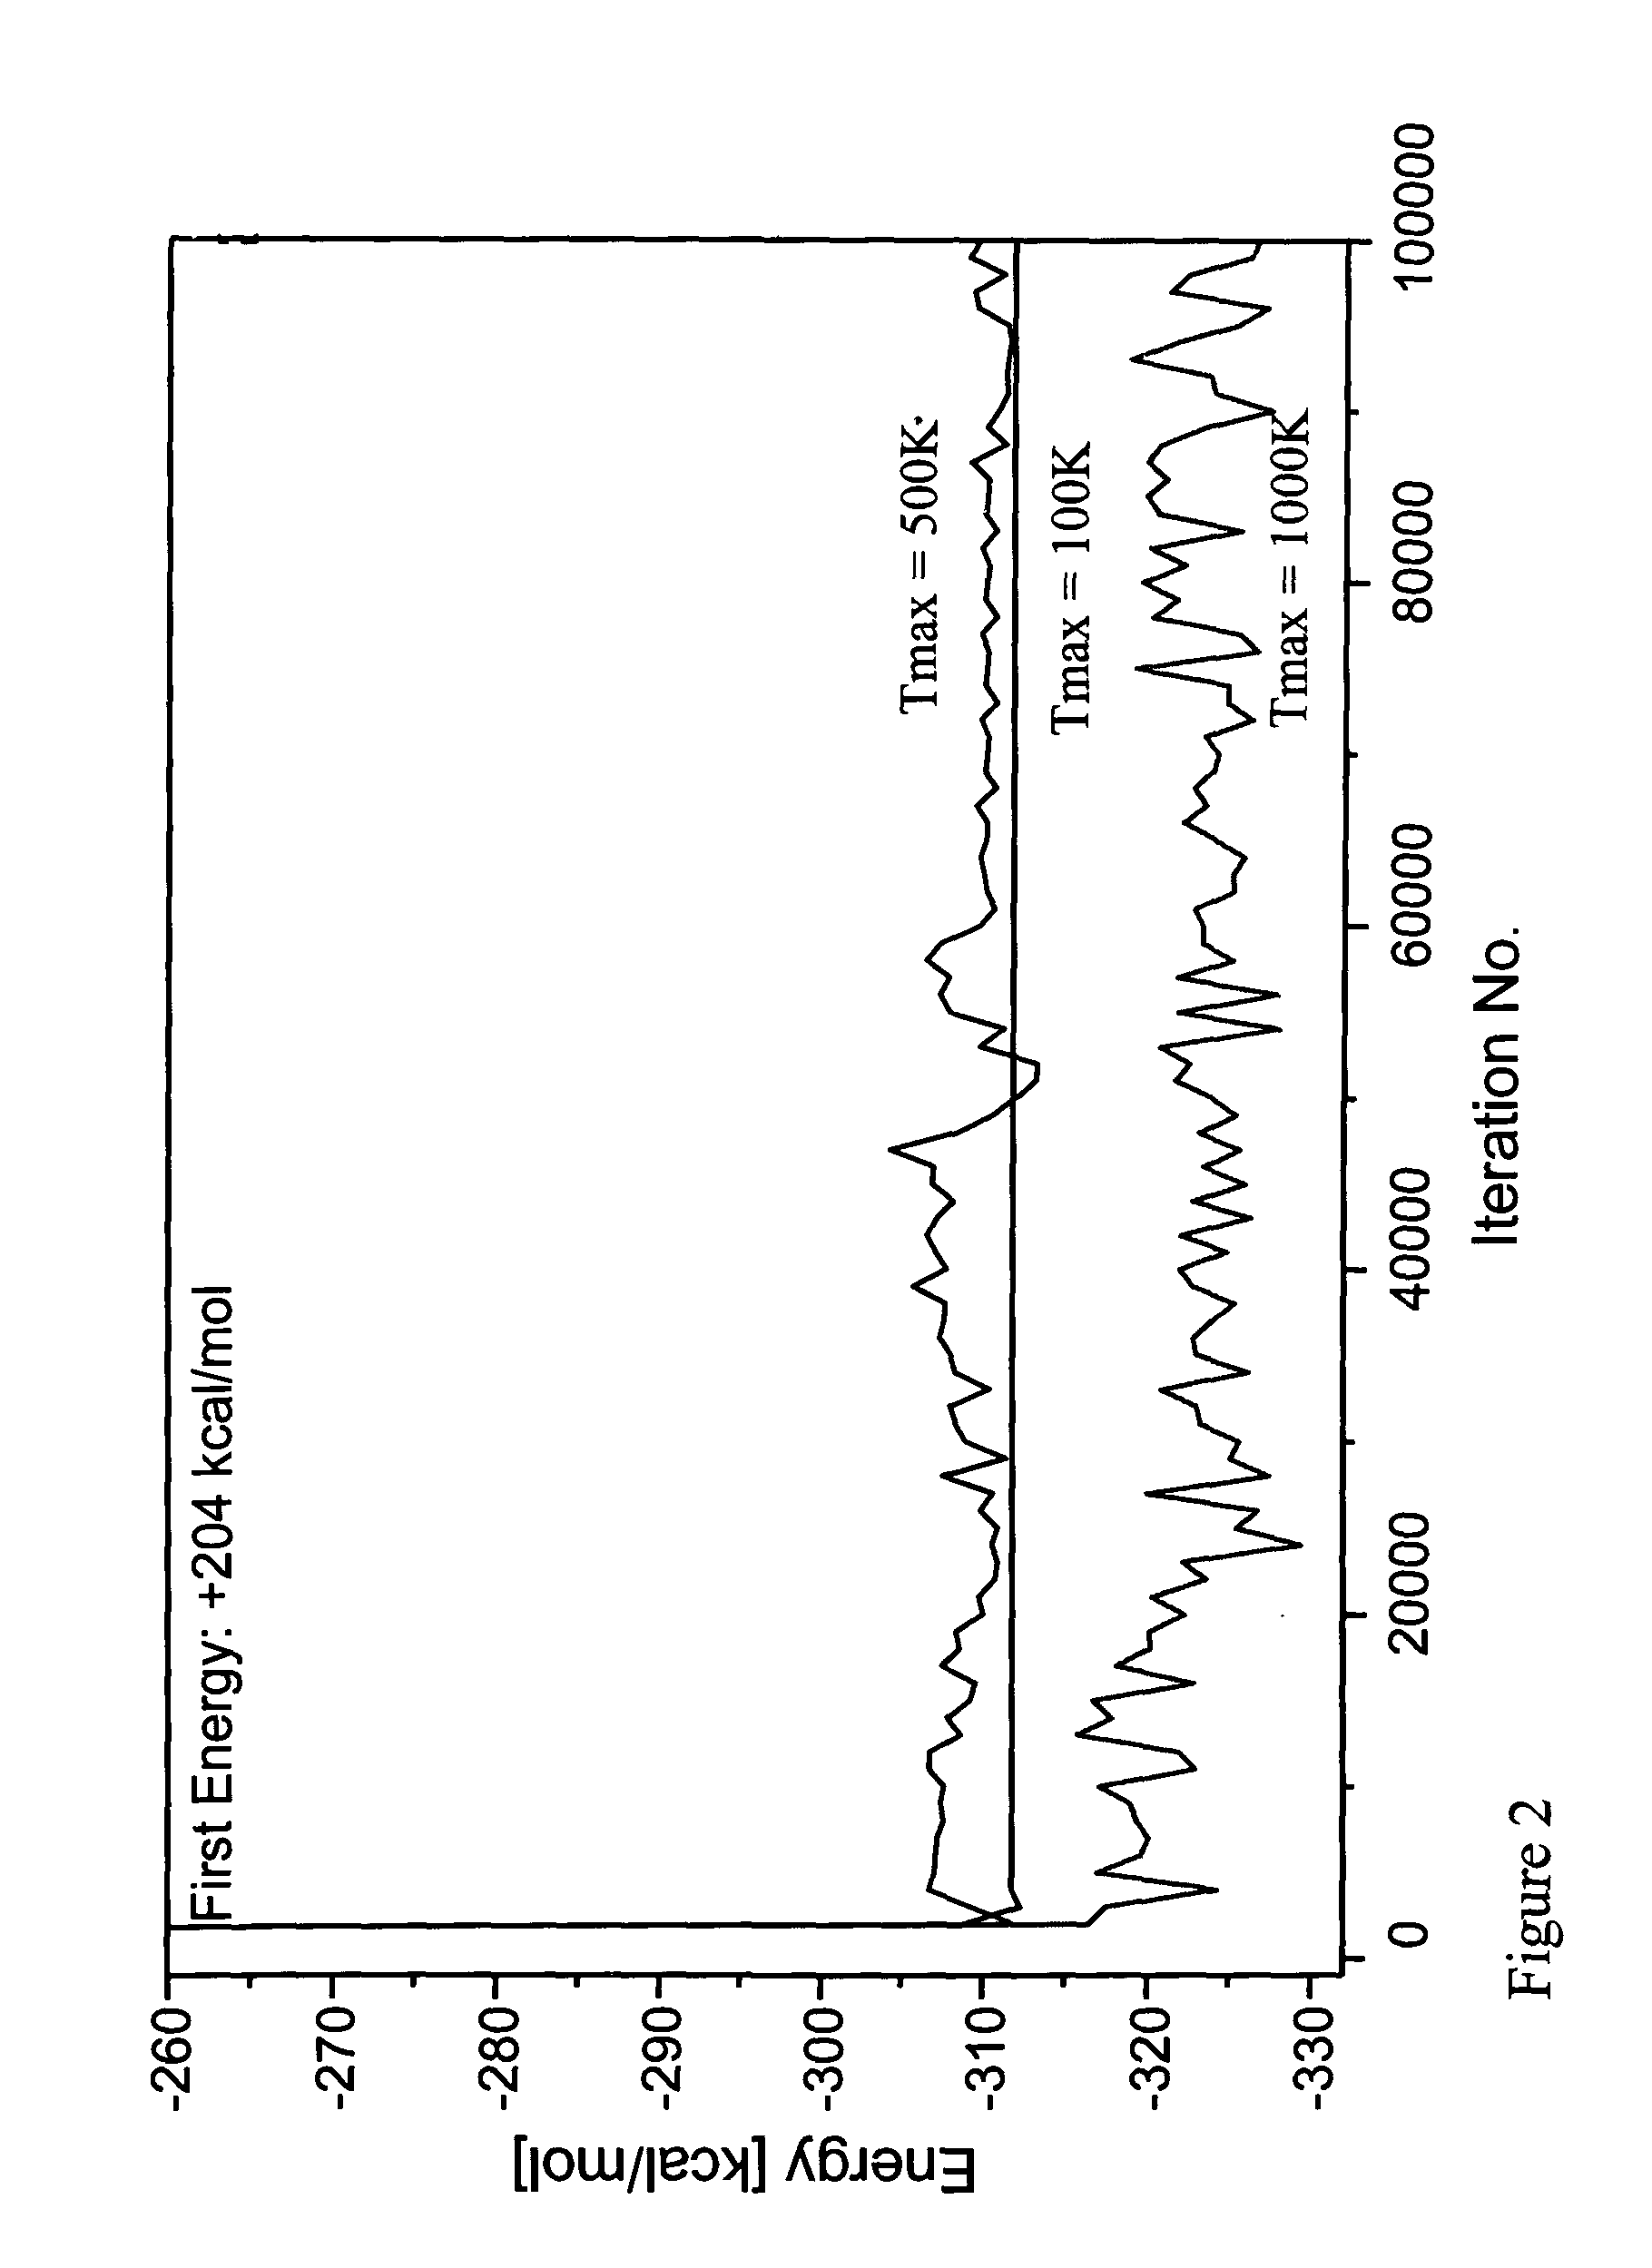 Method and system for predicting amino acid sequences compatible with a specified three dimensional structure